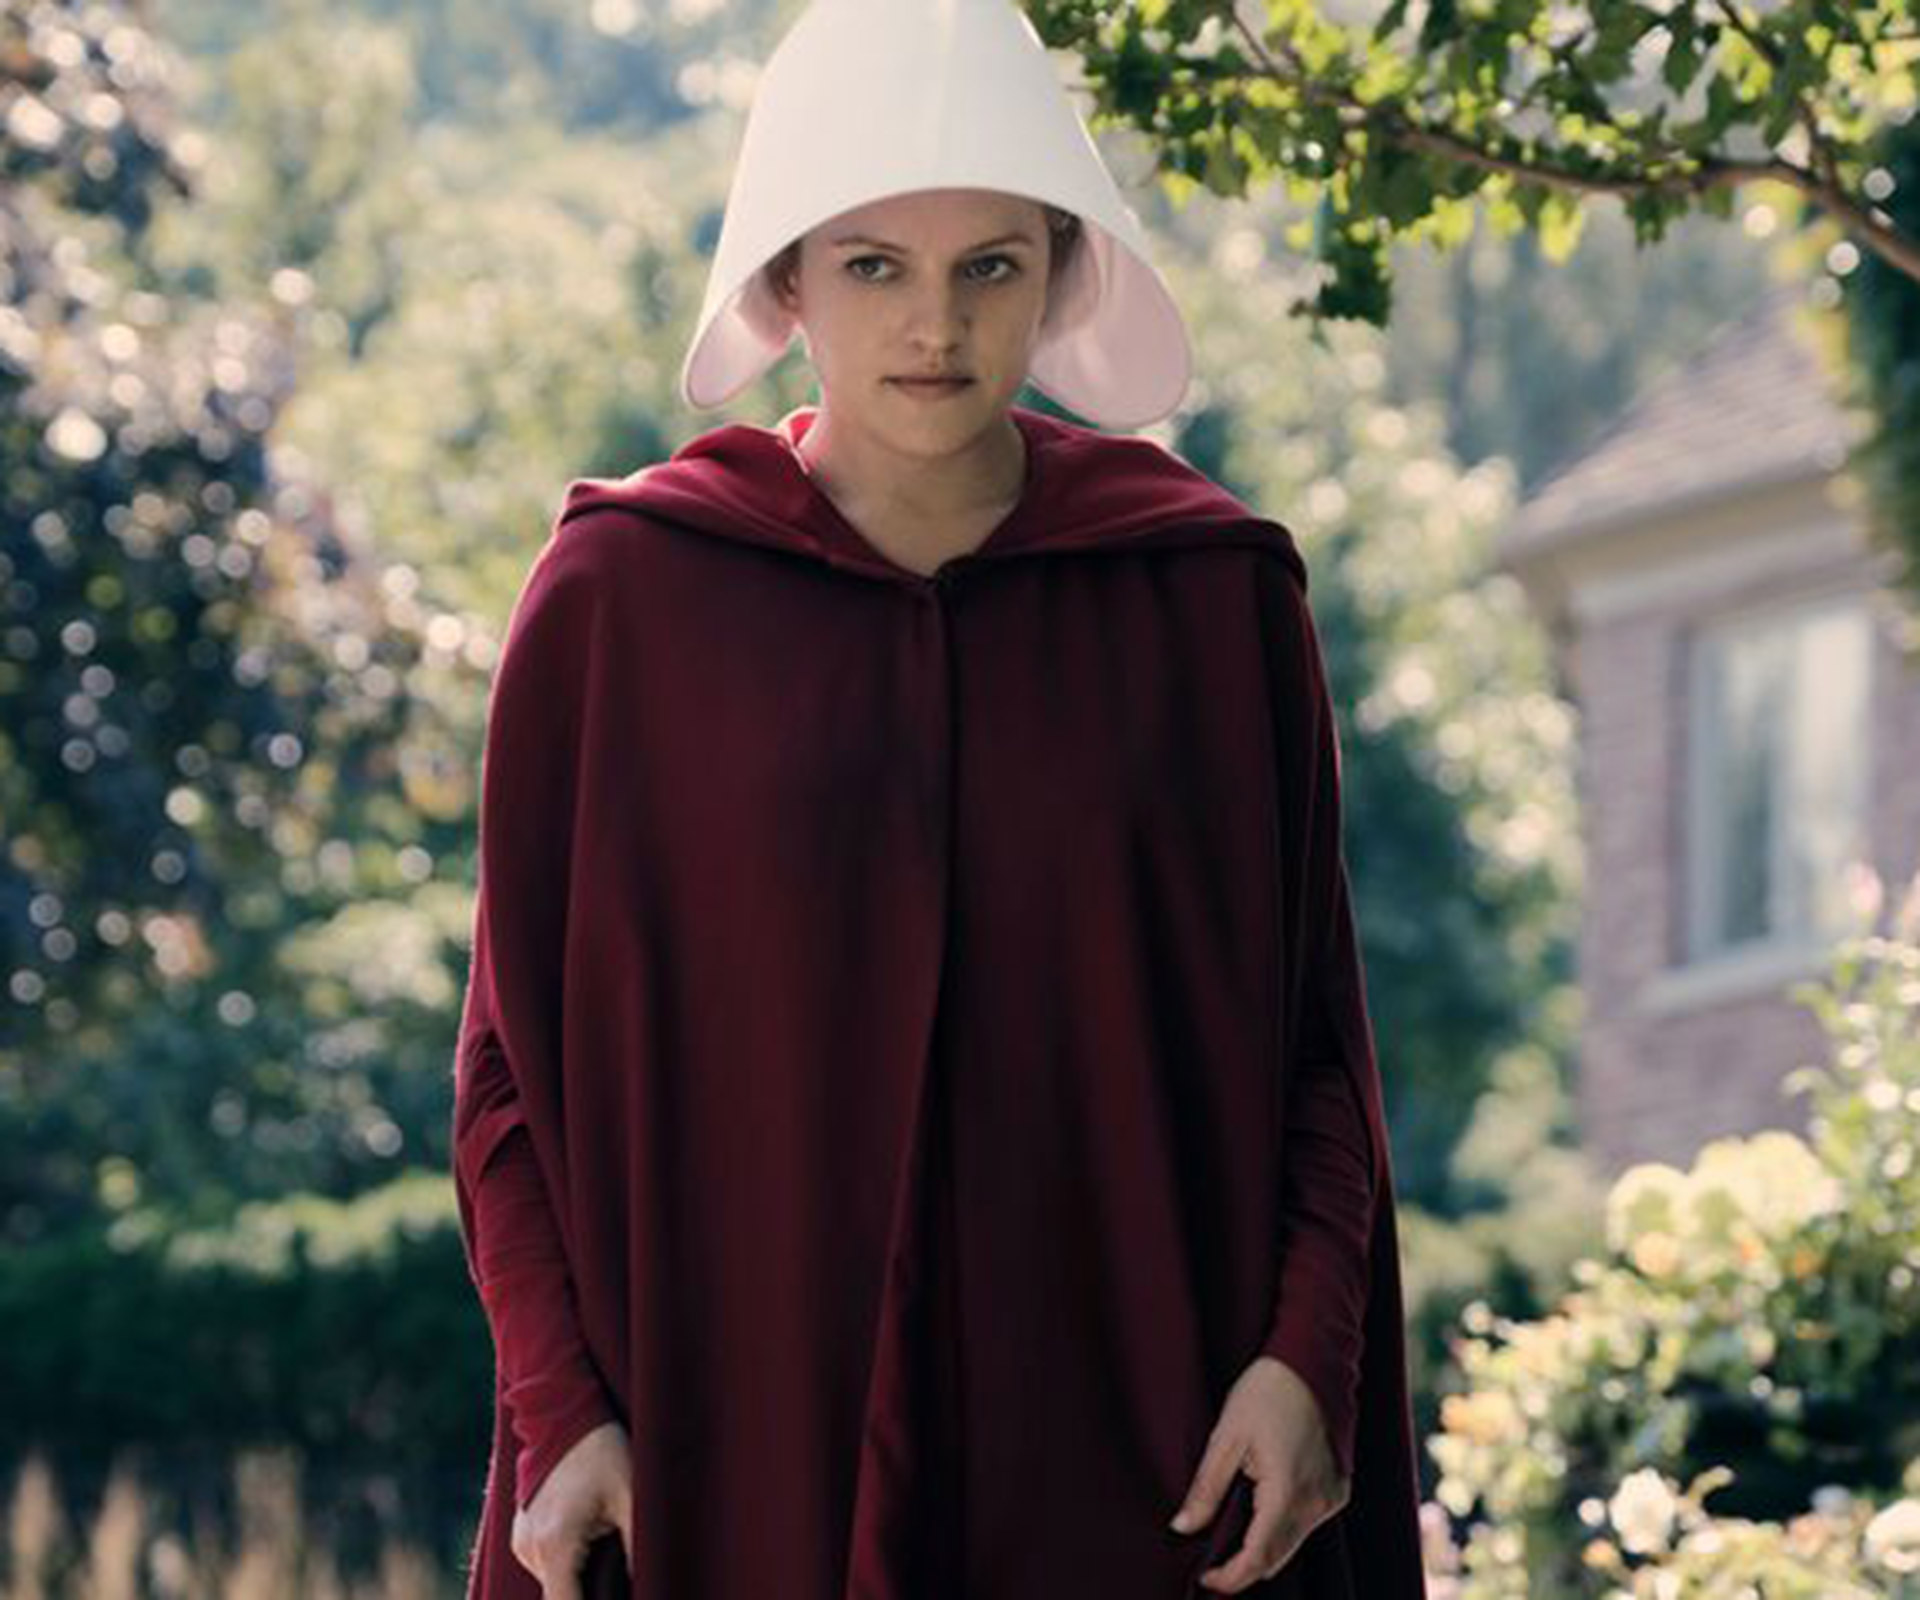 Elisabeth Moss defends Scientology after fan compares it to 'The Handmaid's Tale'